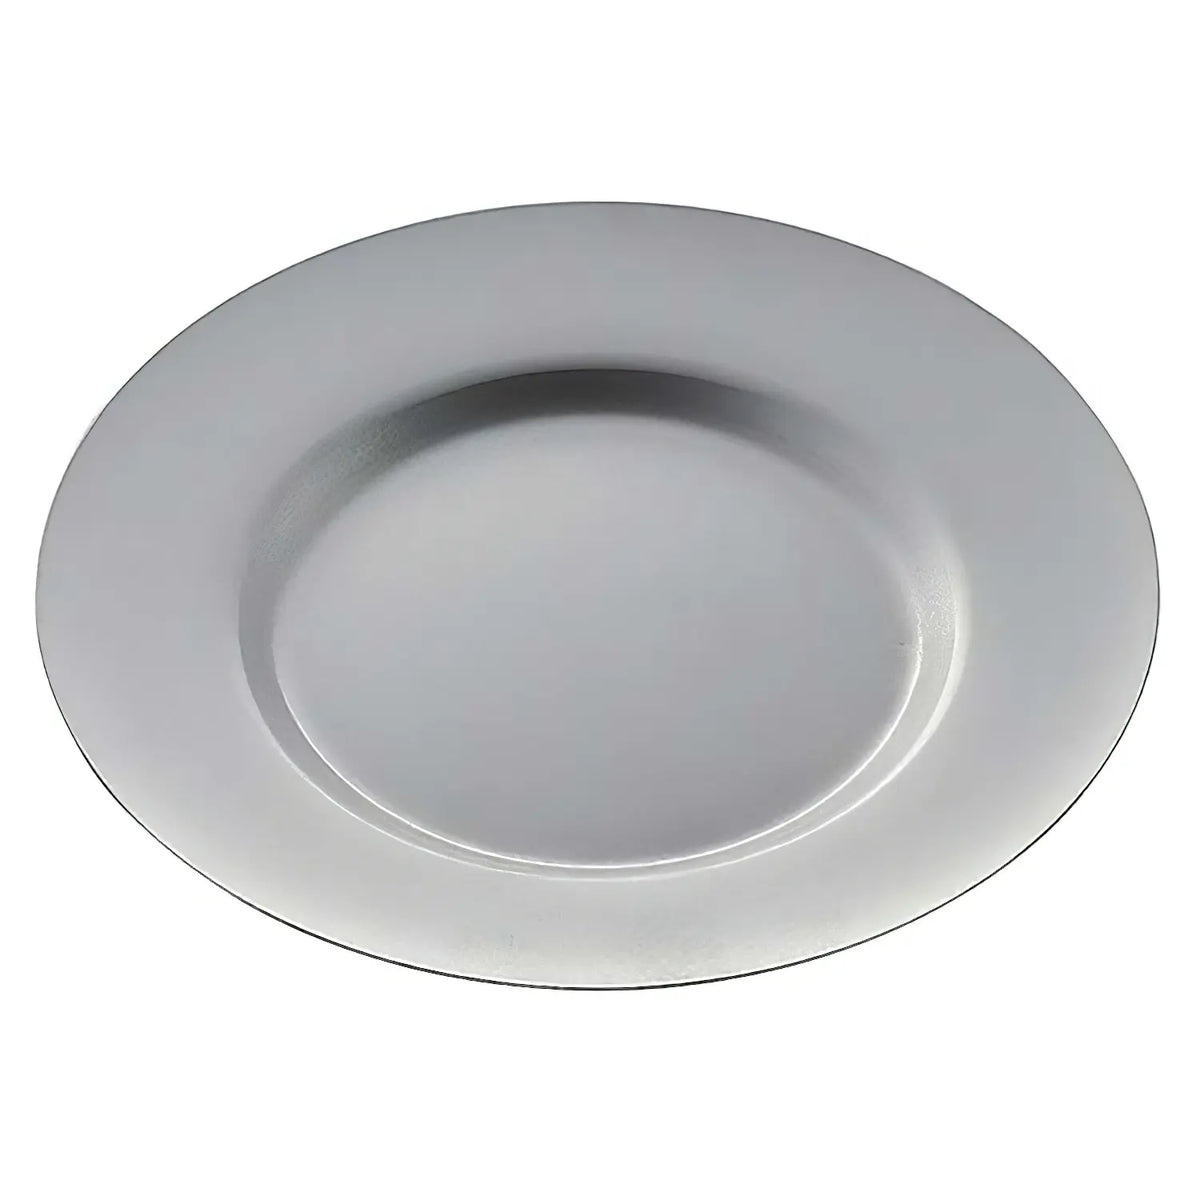 AOYOSHI VINTAGE Stainless Steel Round Plate